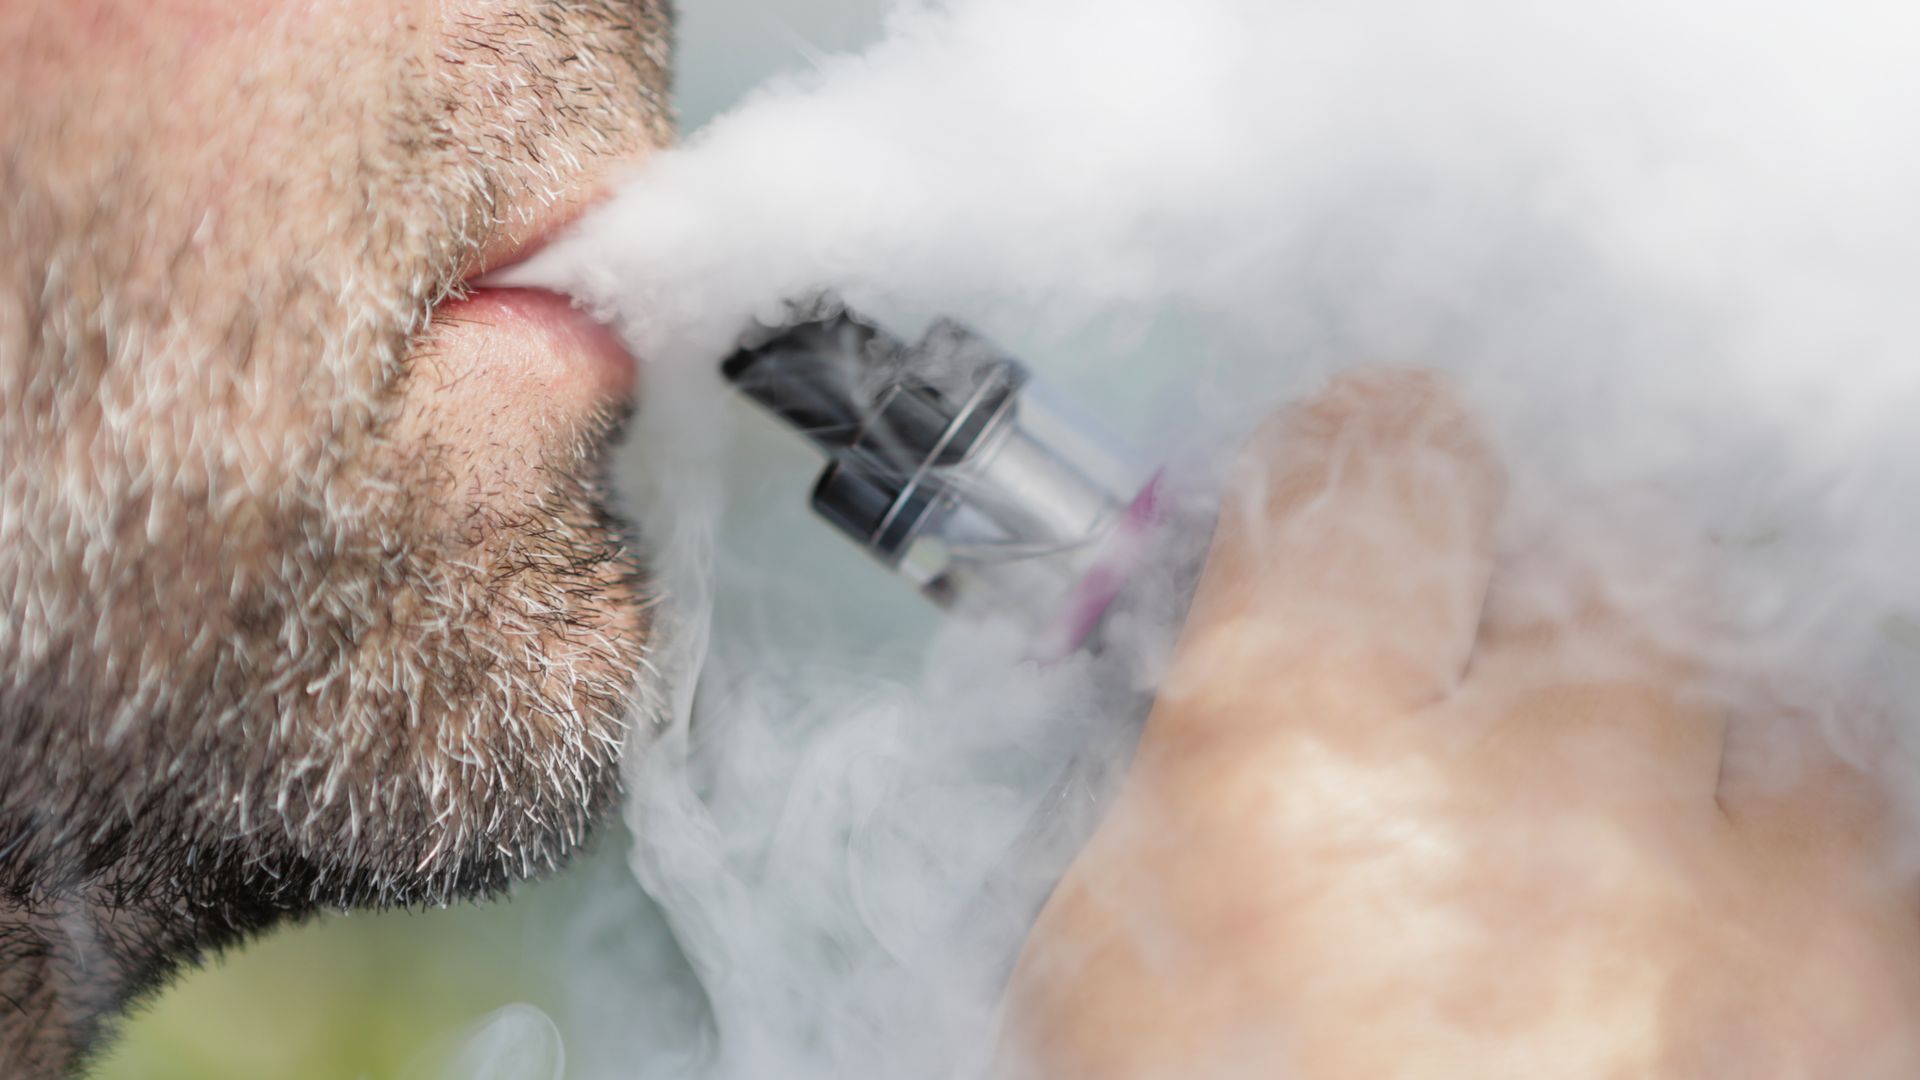 In this image, a man with a beard smokes with a vaping pen.